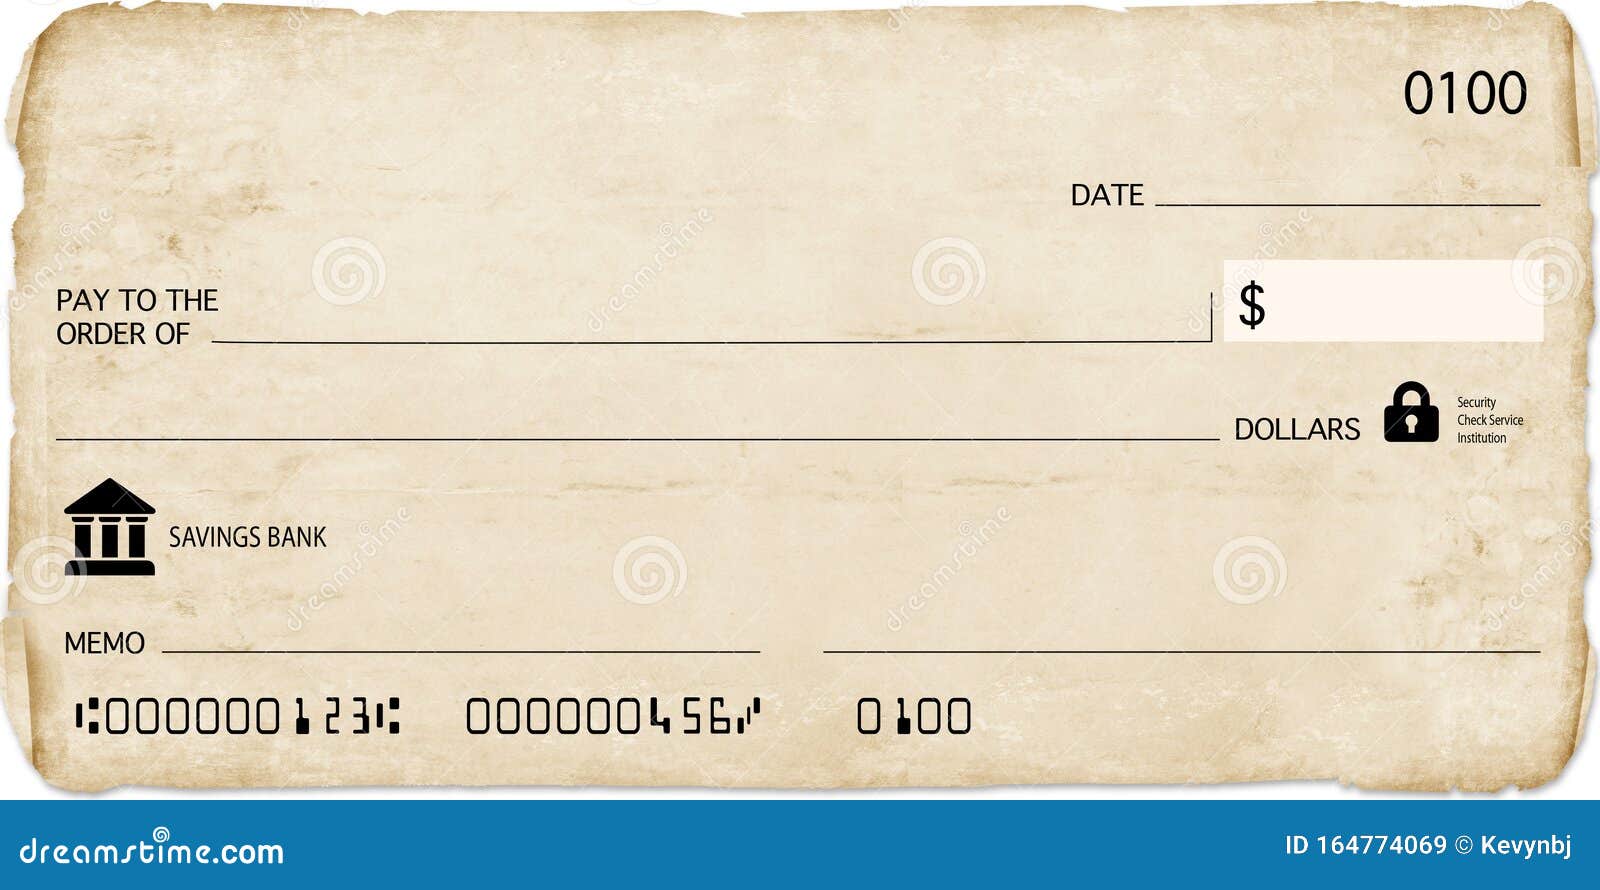 Fillable Blank Check Template Free [Word, PDF] » TemplateData